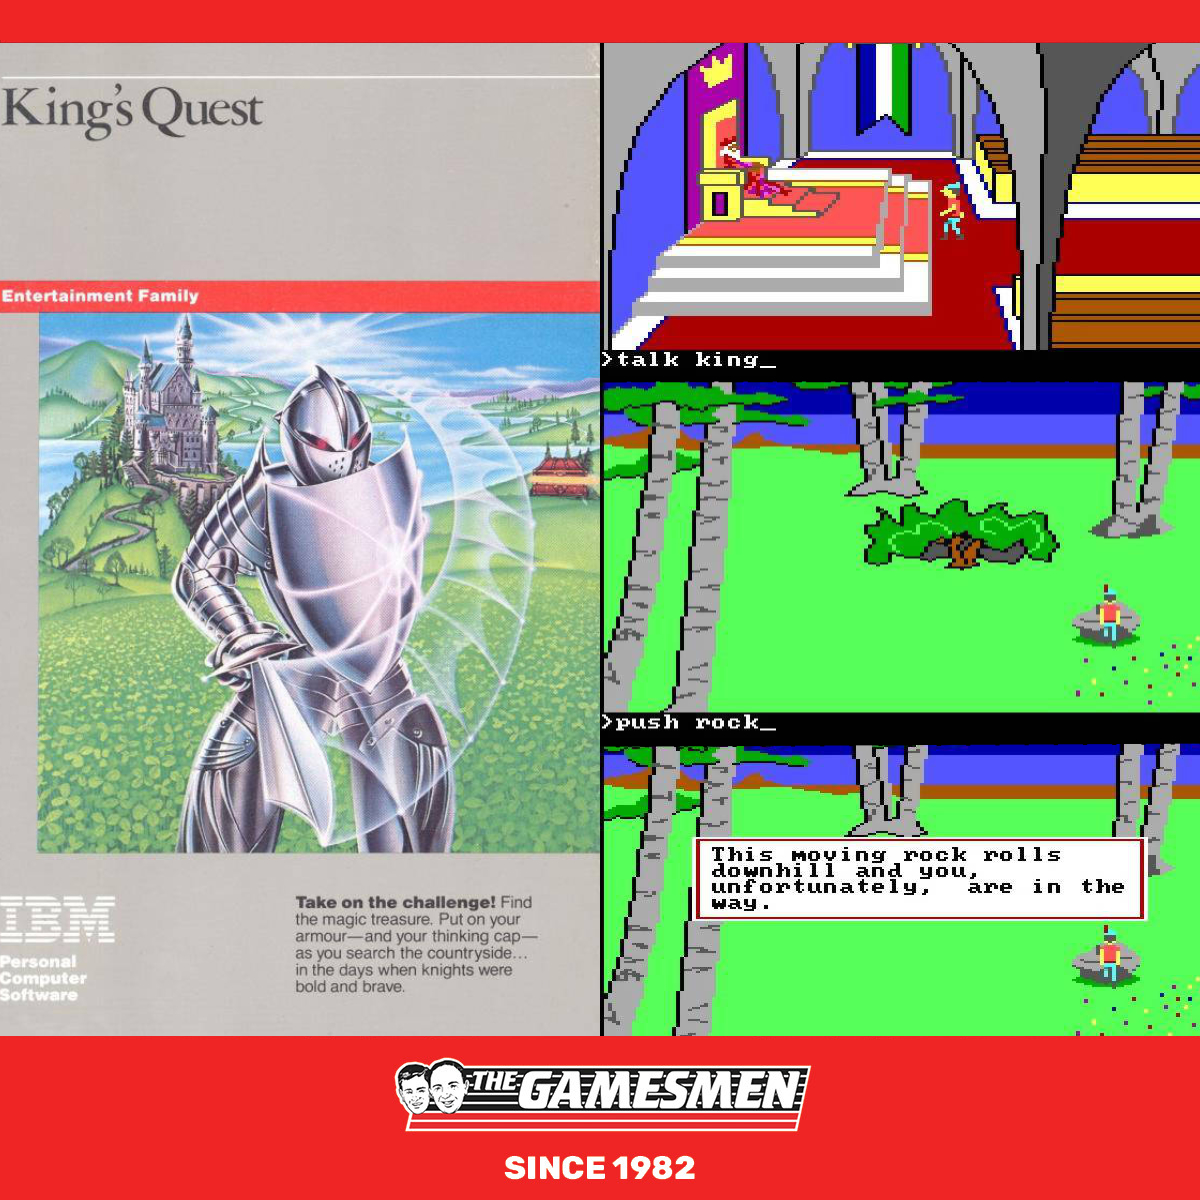 On this day in 1984, King's Quest made its way to computers!

40 years ago, this text-based adventure designed by Roberta Williams launched Sierra into the spotlight as the first '3D-animated' adventure game & changed the face of gaming.

Have you played this legendary series?